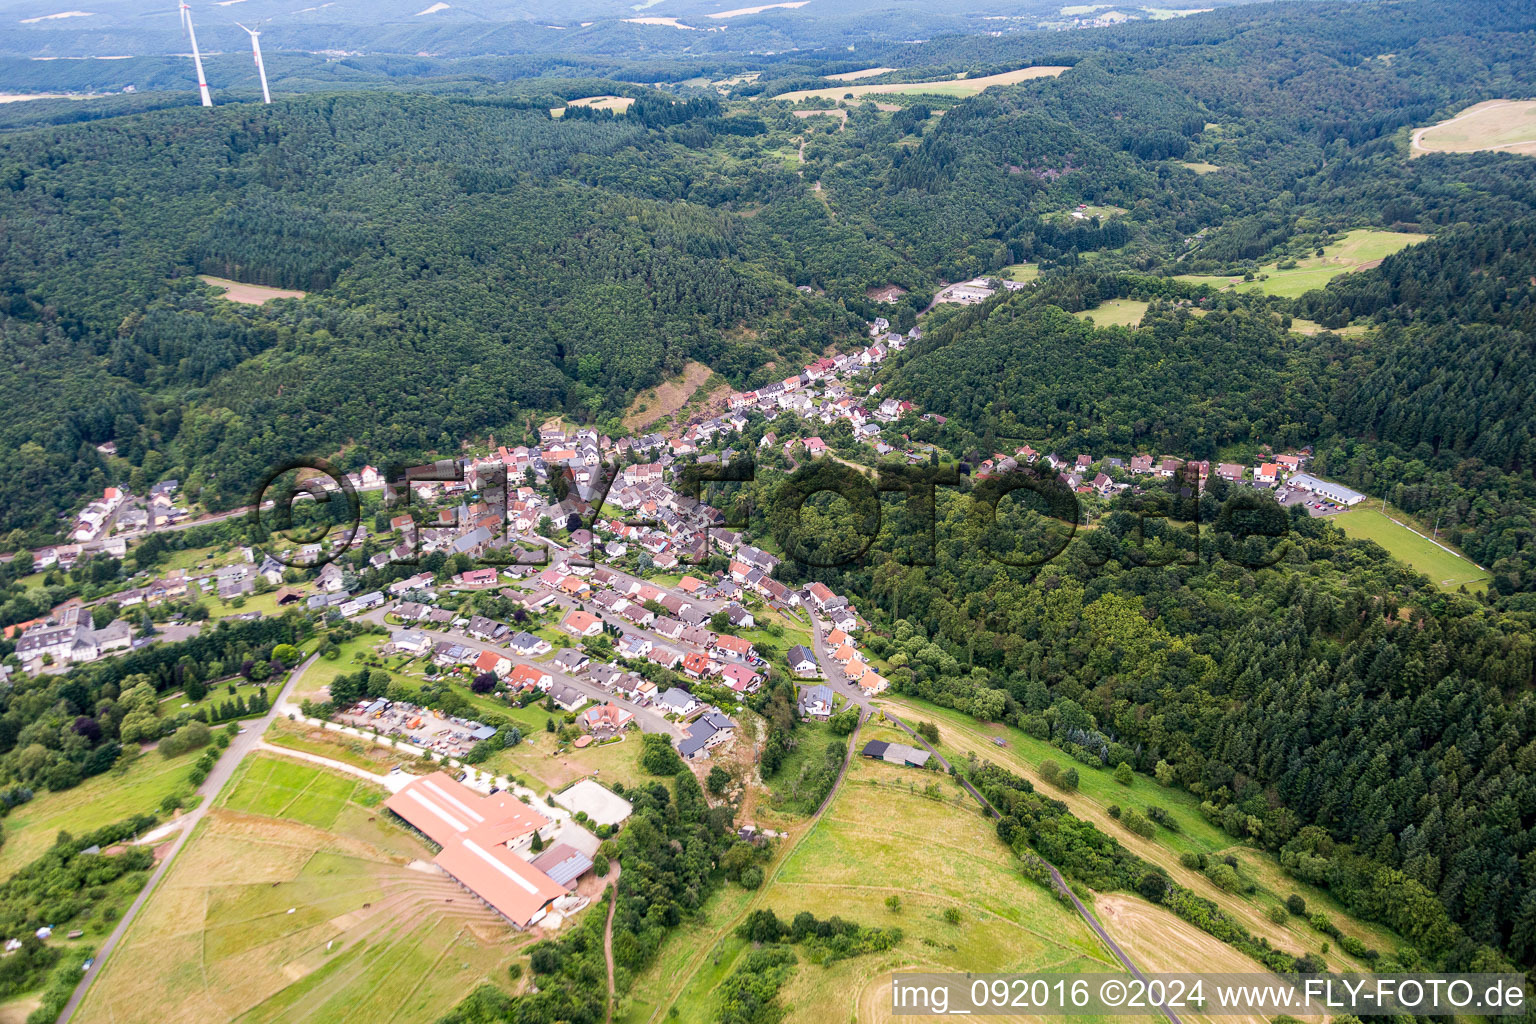 Village - view on the edge of agricultural fields and farmland in the district Kirchenbollenbach in Idar-Oberstein in the state Rhineland-Palatinate, Germany